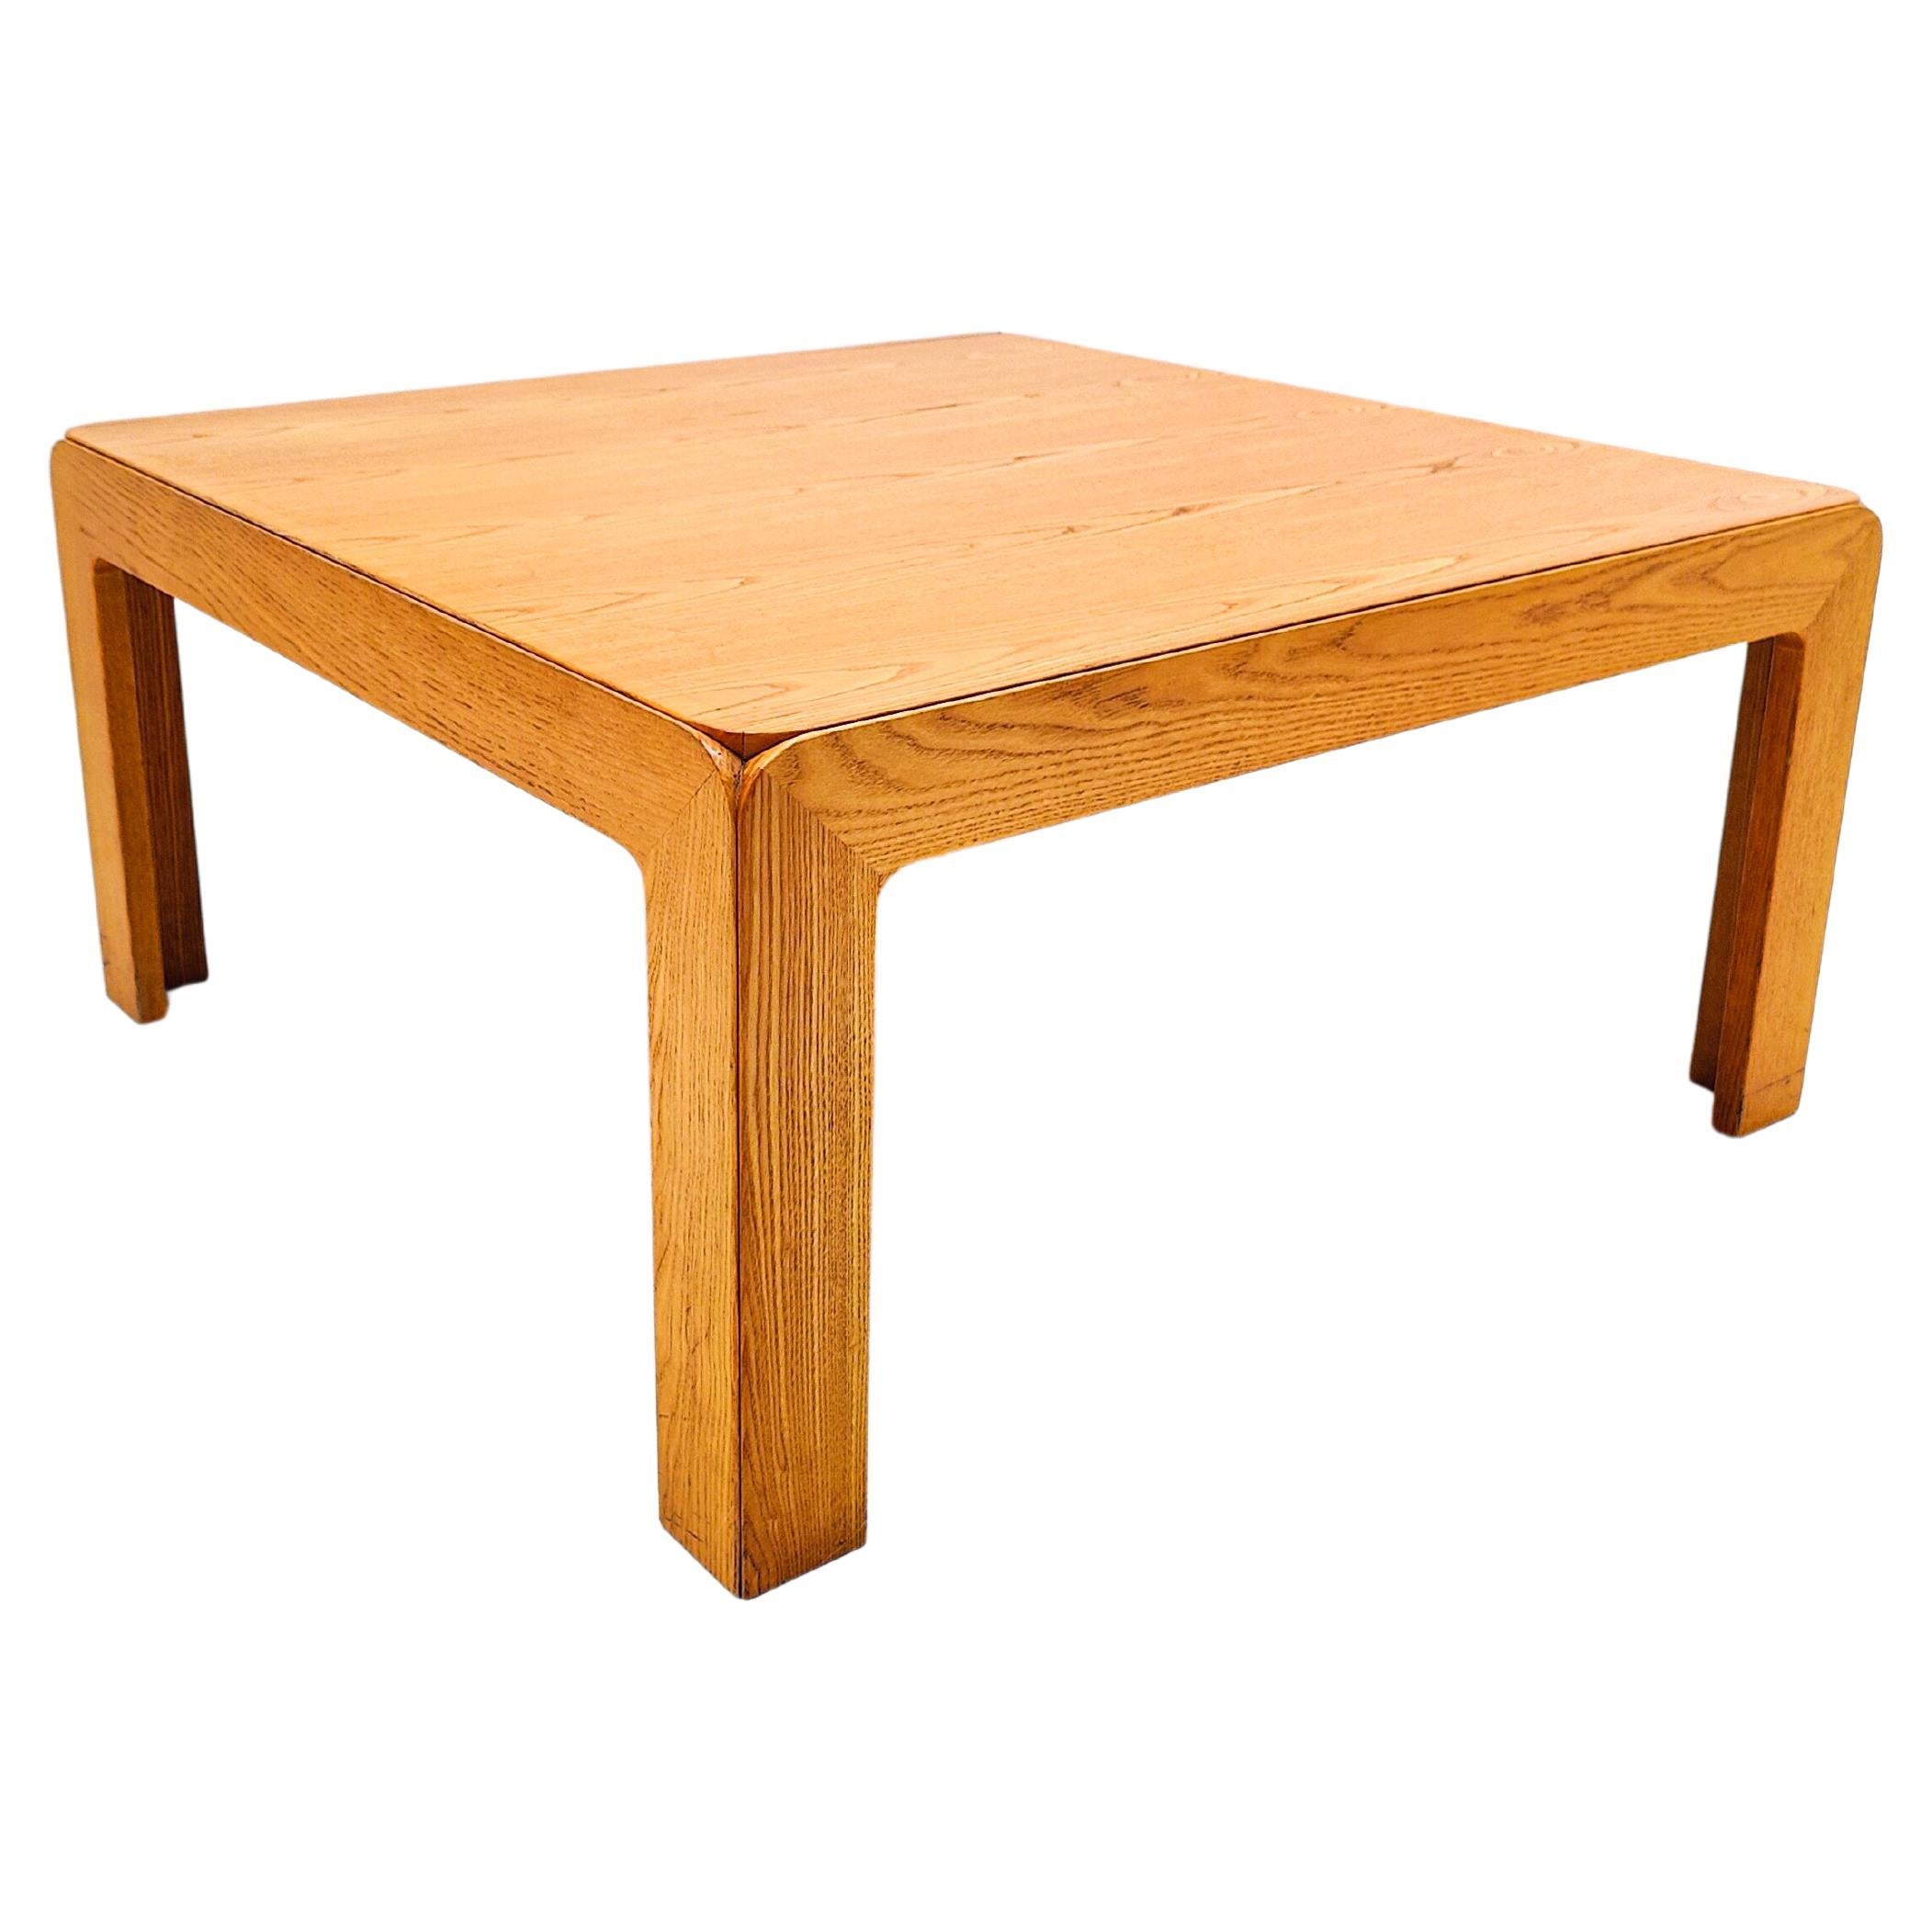 Mid-Century Square Wooden Coffee Table by Derk Jan de Vries - The Netherlands For Sale